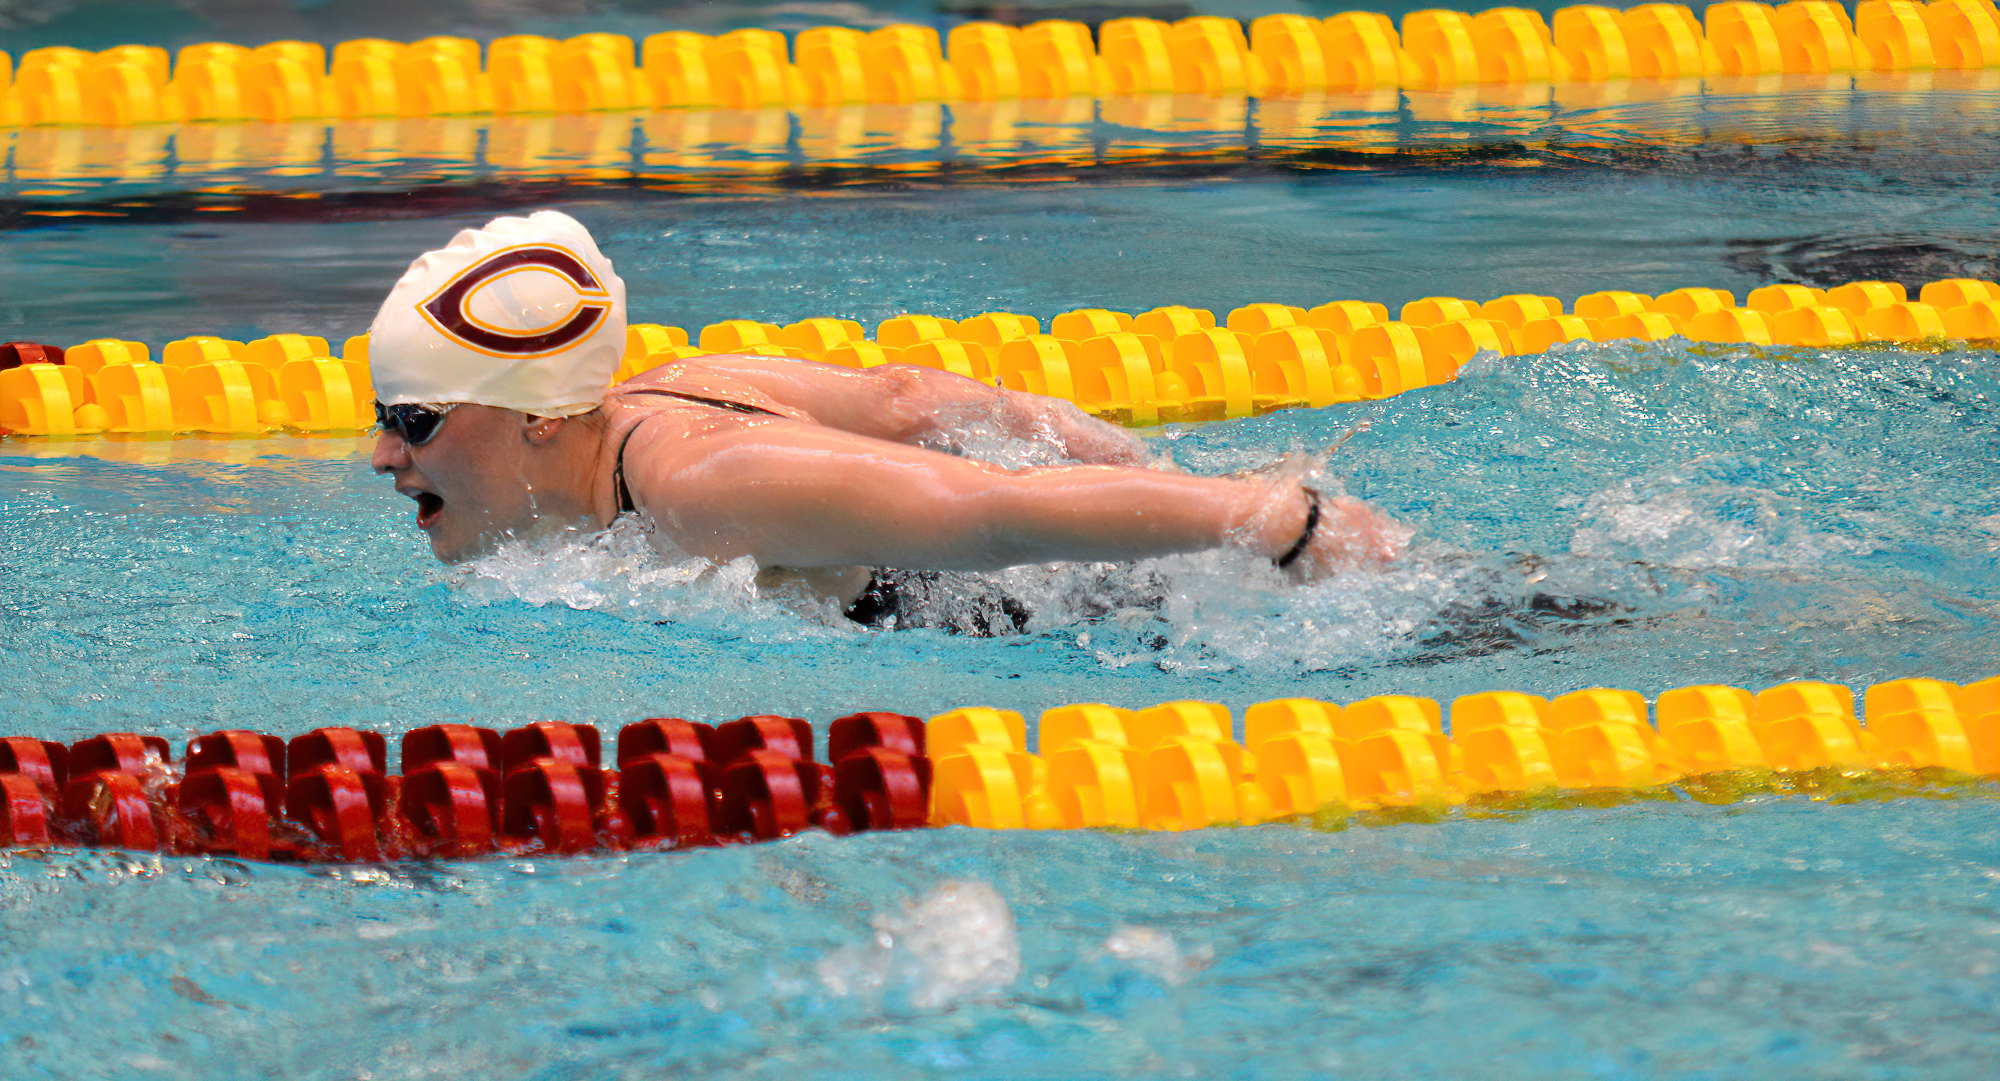 One of the Cobber swimmers comes out of the water during the prelims of the 100-yard butterfly at the MIAC Meet. (Photo courtesy of MIAC Office)